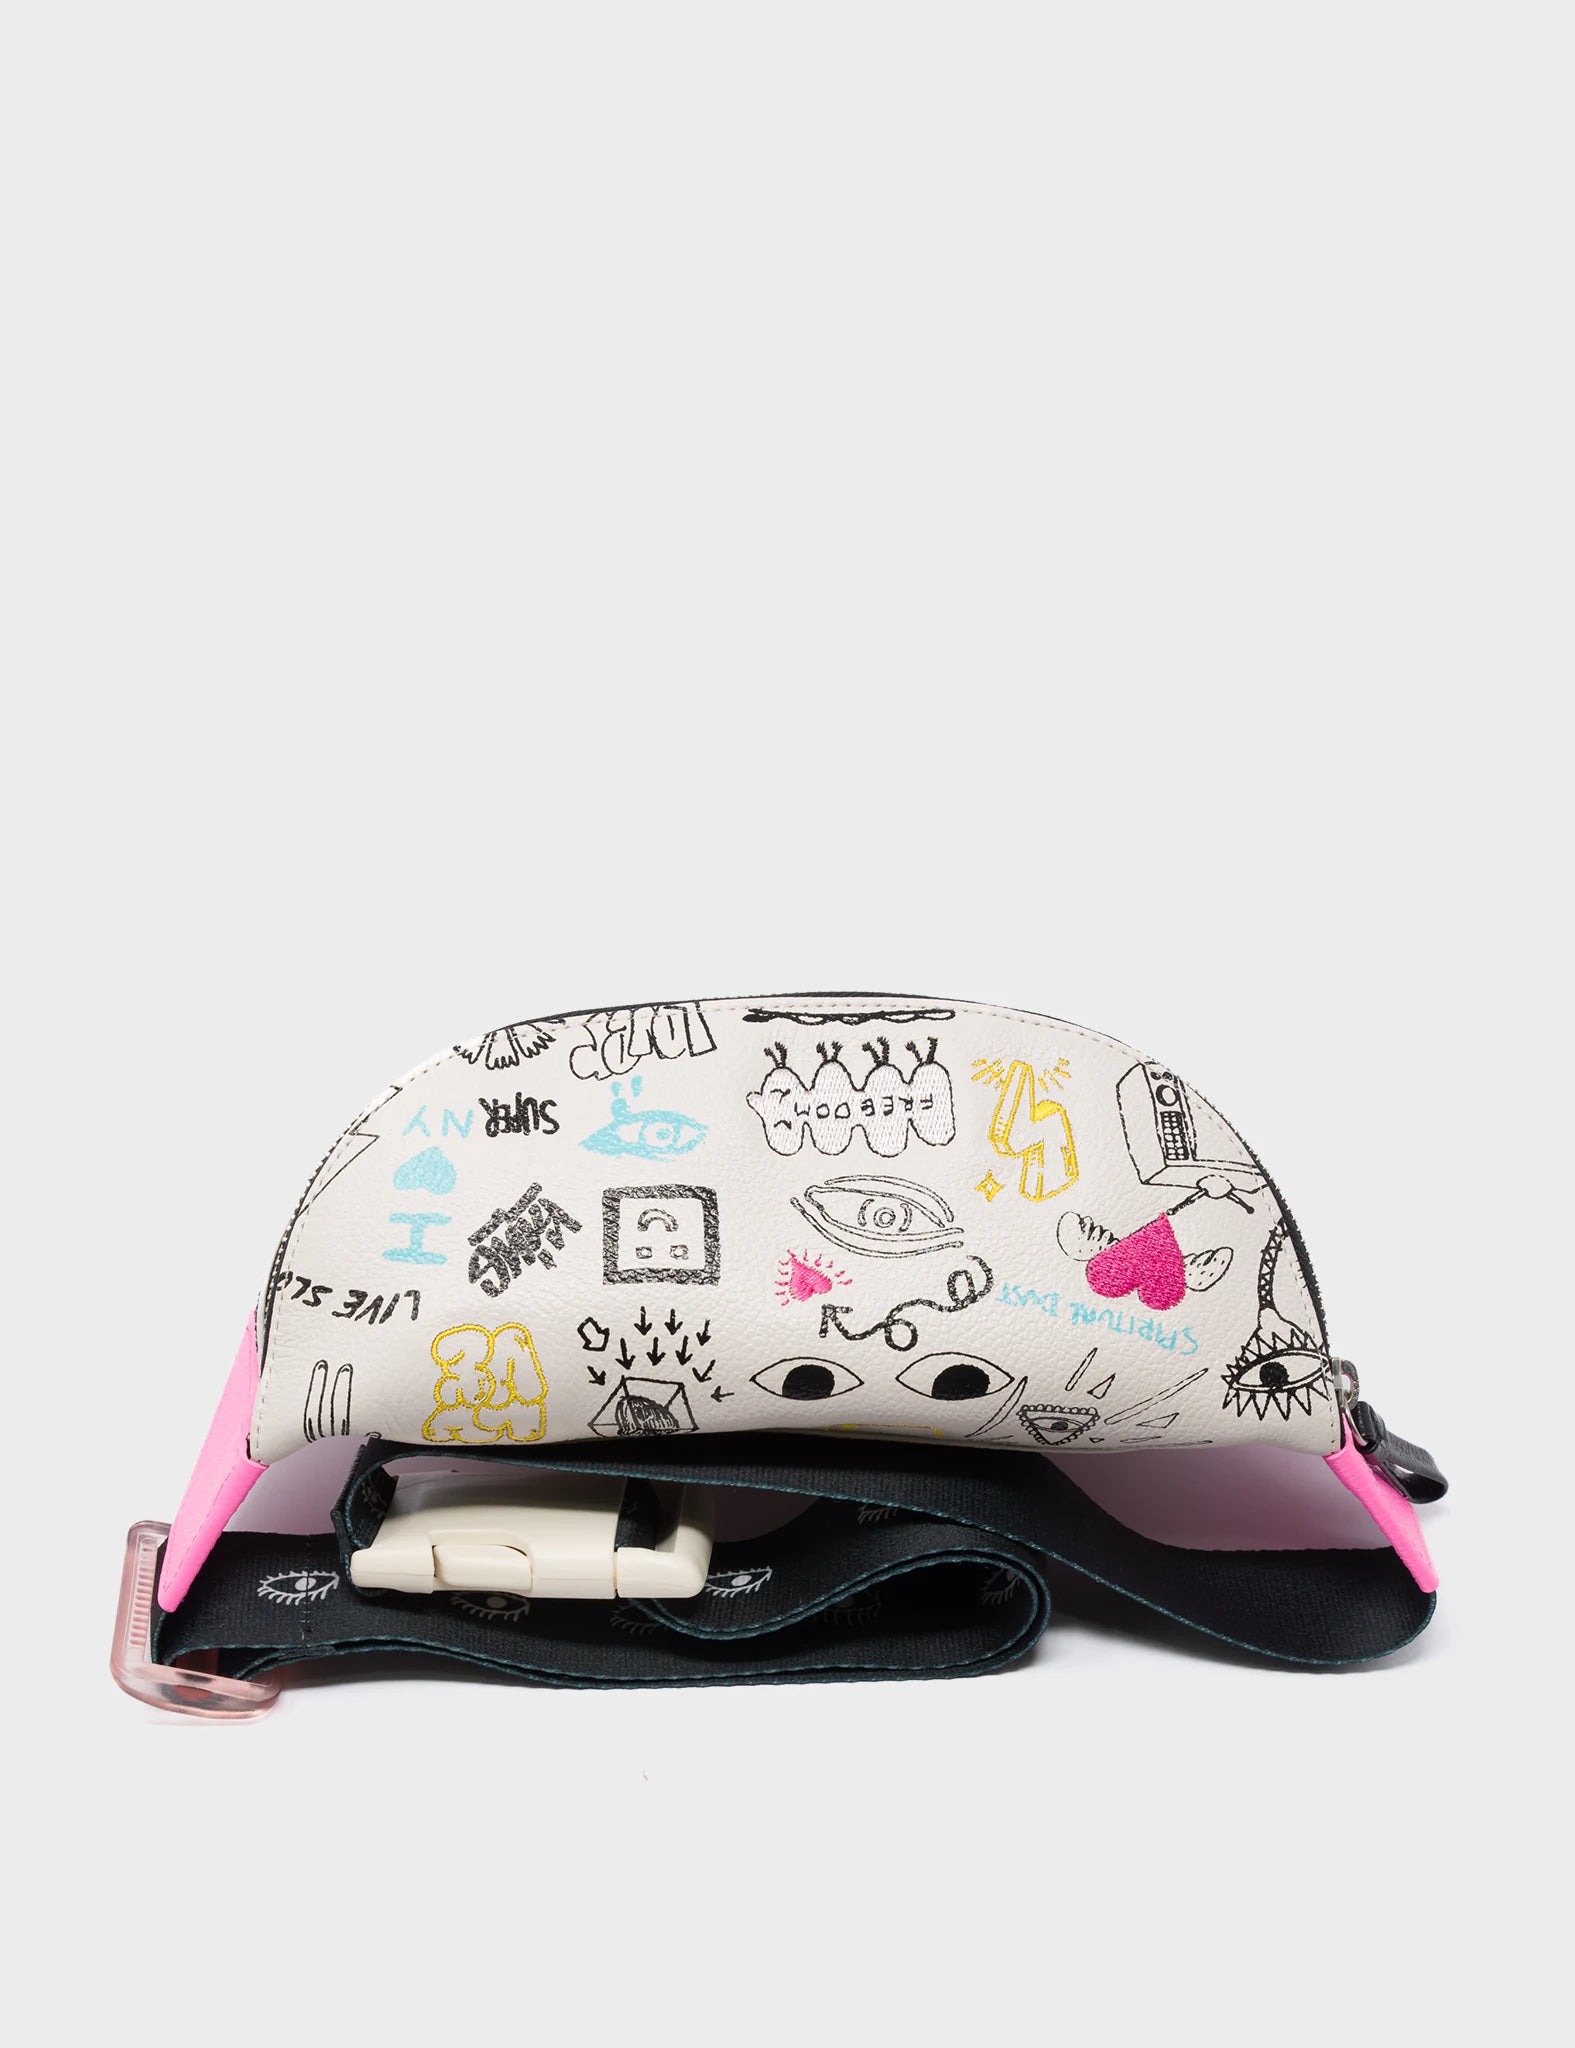 Harold Fanny Pack Cream Leather - Urban Doodles Embroidery - Top View